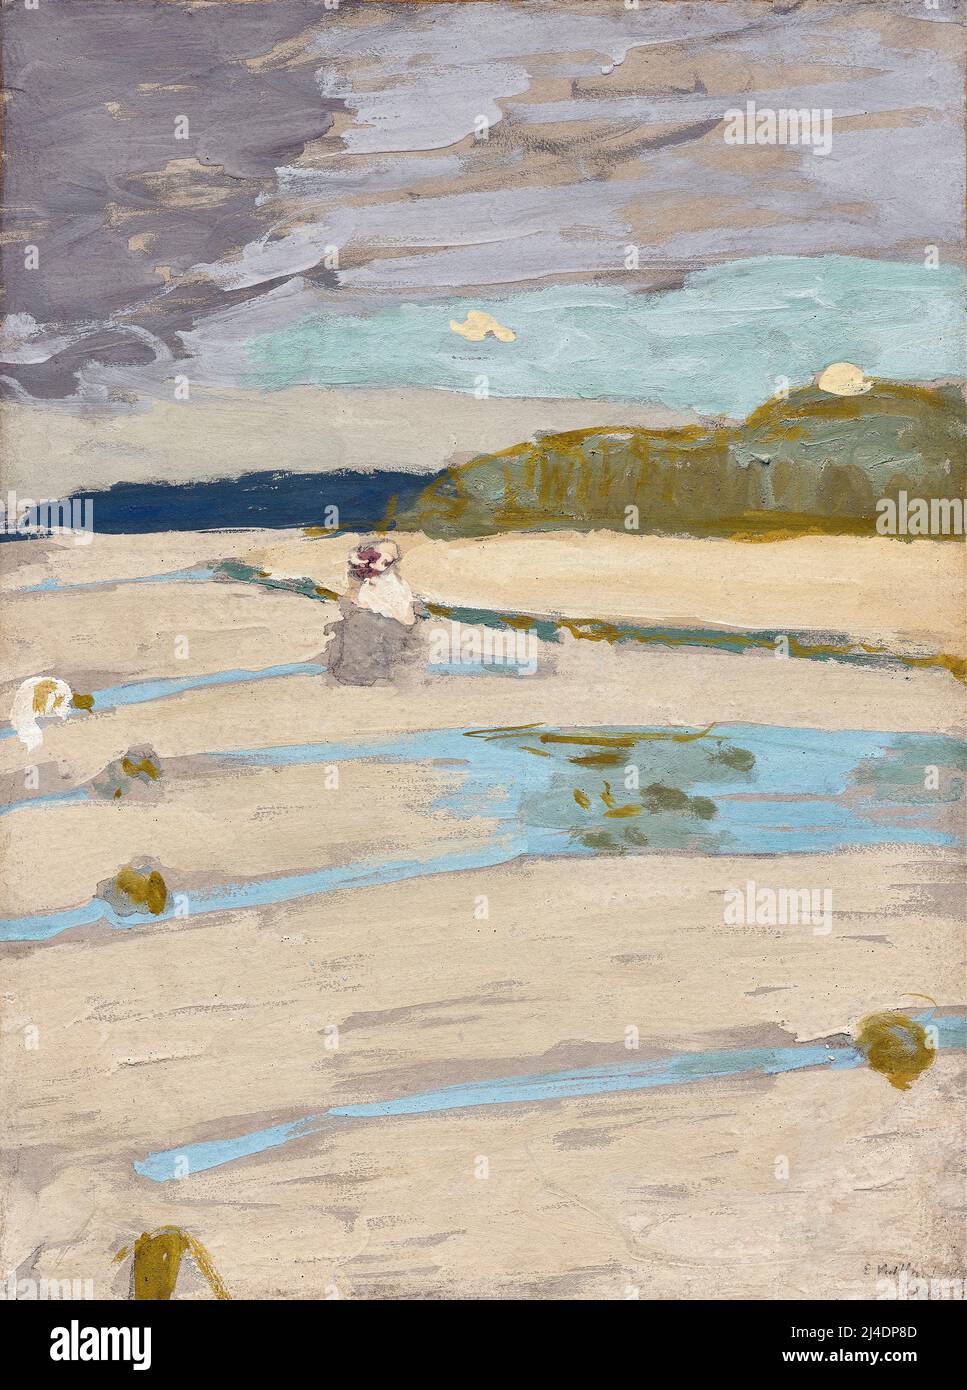 Édouard Vuillard, landscape painting in distemper on paper mounted on canvas, The Beach at Saint-Jacut, 1909 Stock Photo